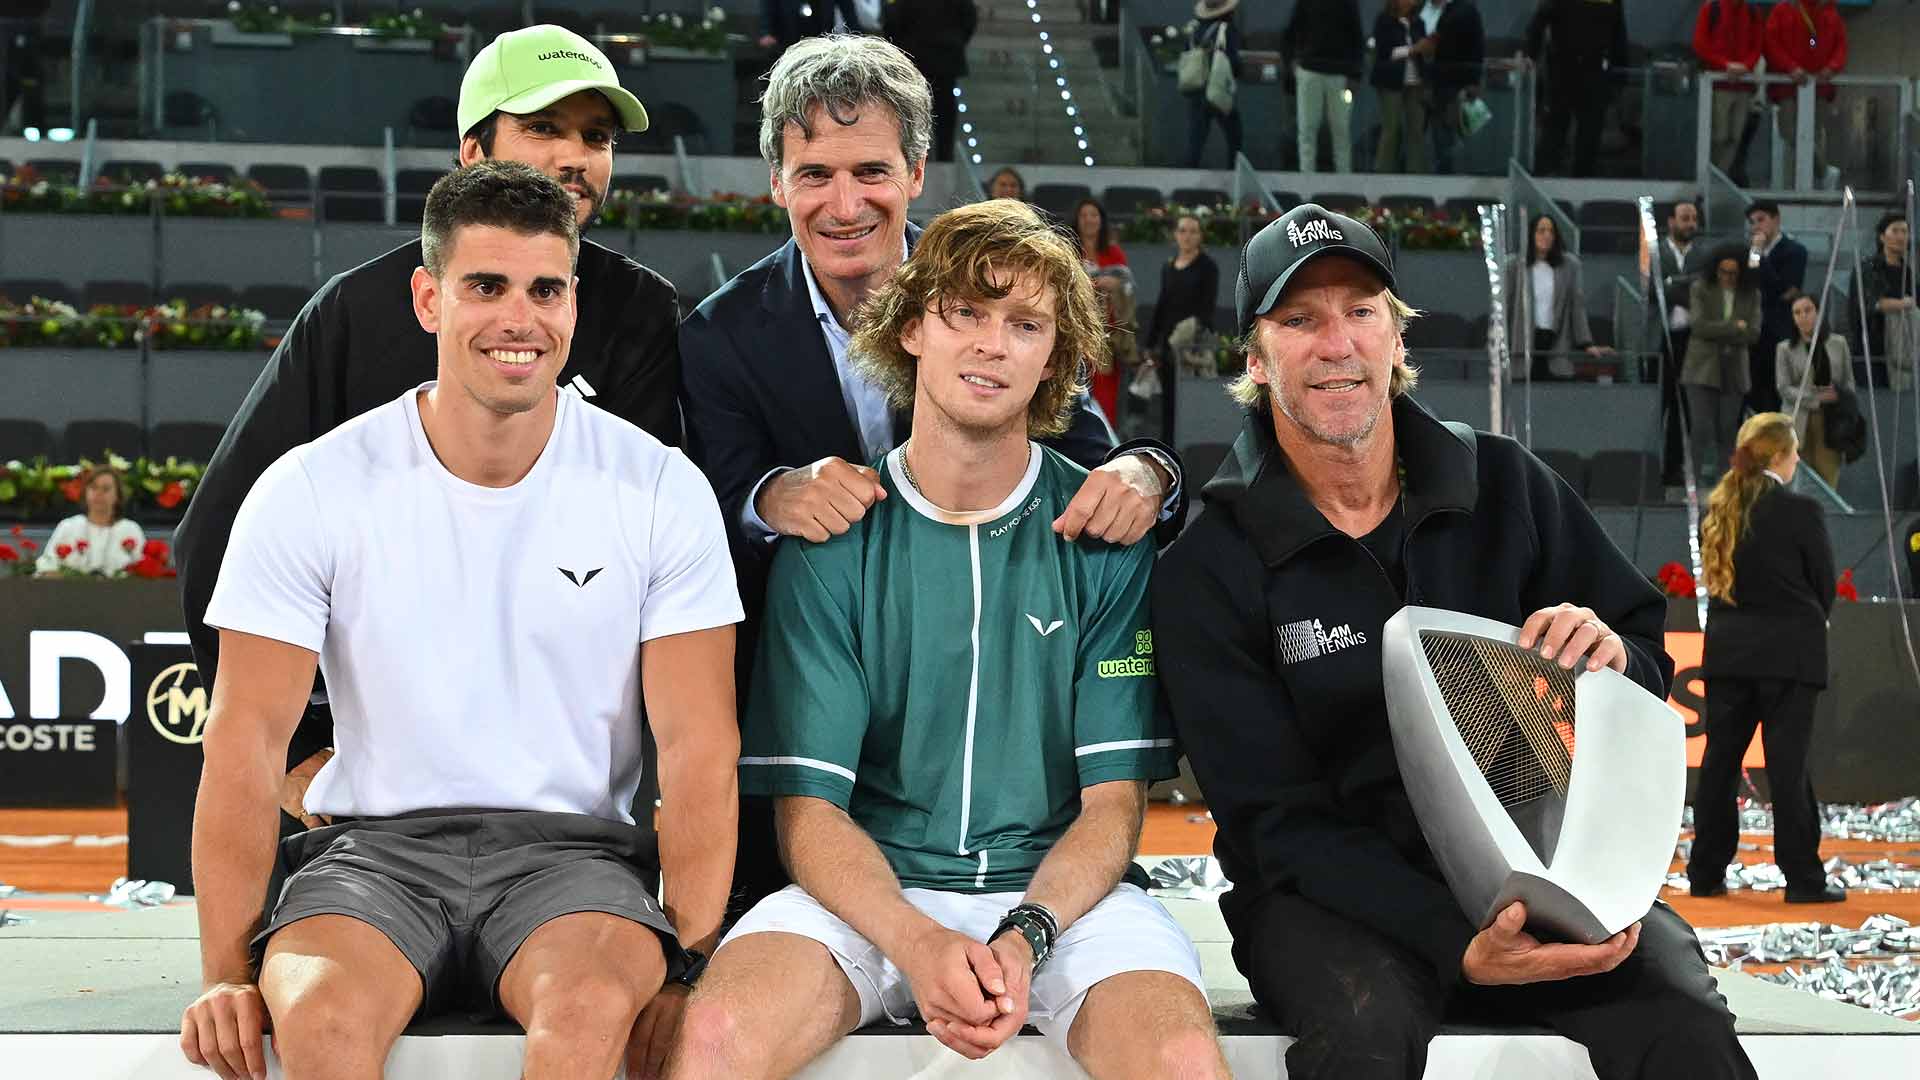 Bouncing back: Rublev thrilled with Madrid triumph after illness & struggles